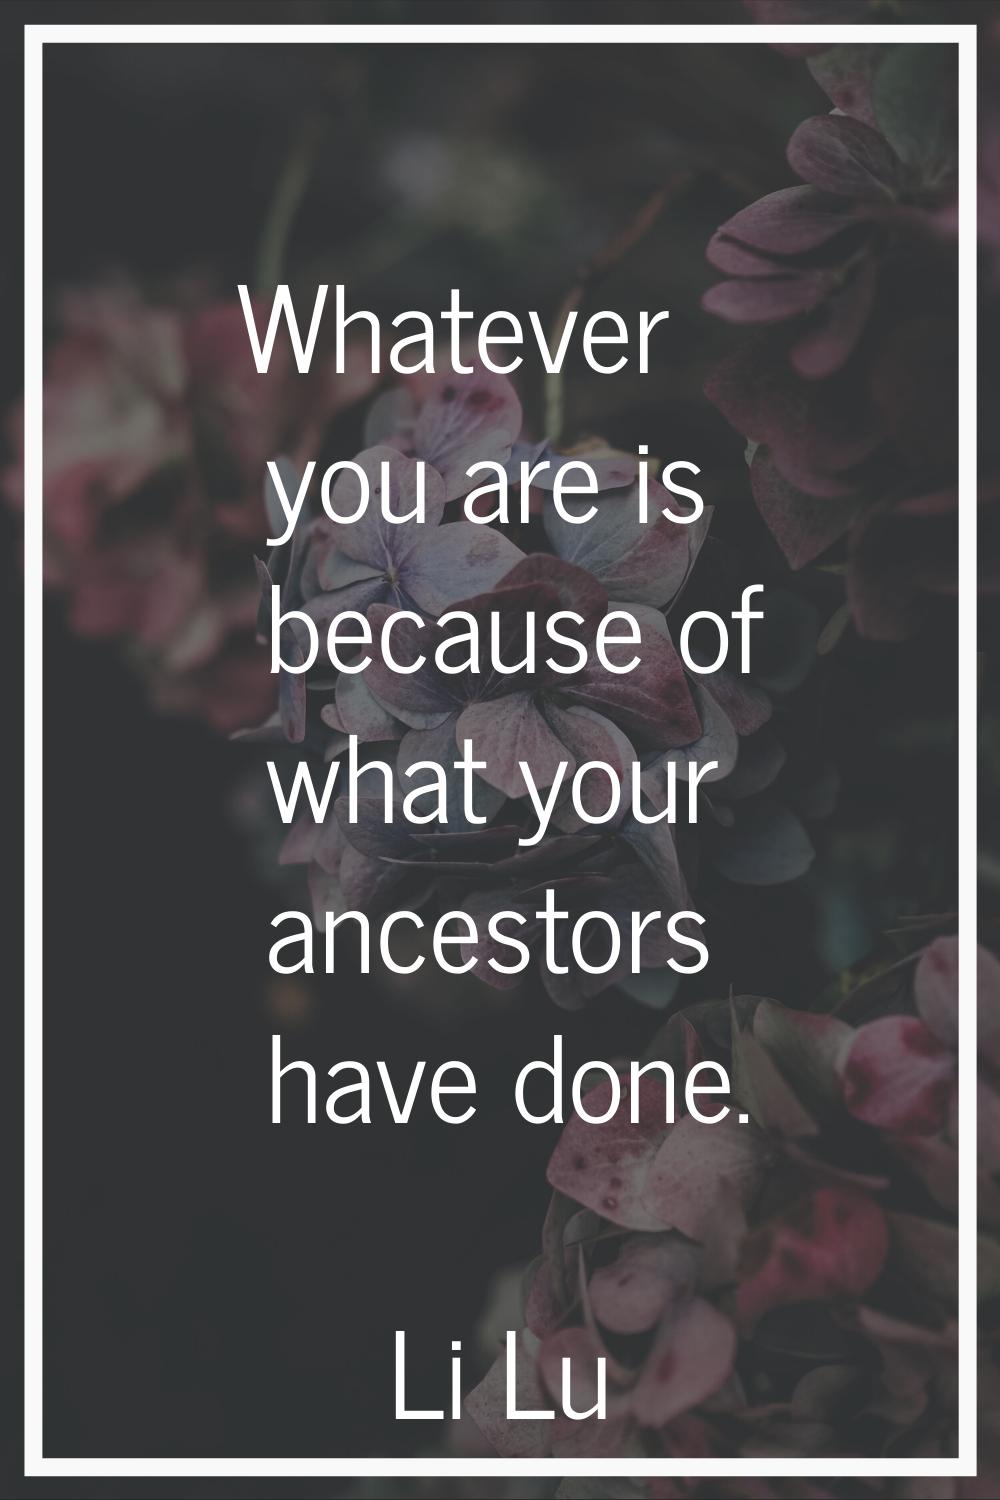 Whatever you are is because of what your ancestors have done.